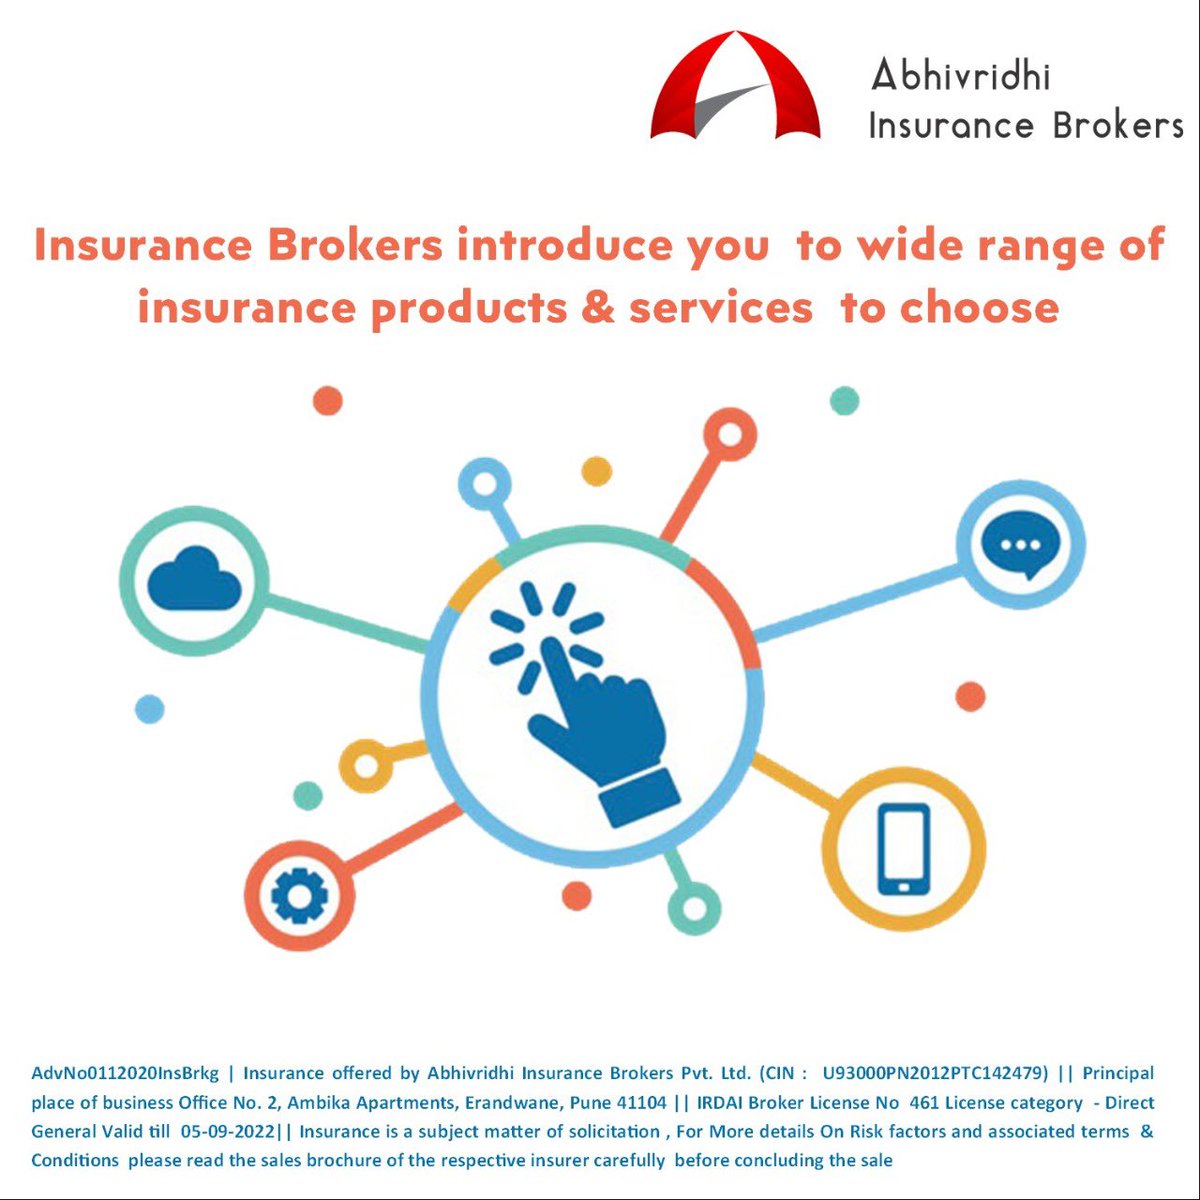 With Insurance Brokers you get a choice to pick the insurance that fits your business and personal insurance needs. 
#BrokersHaiToSahiHai #AbhivridhiInsuranceBrokers #OnlineInsurance #Insurance #InsuranceChoices #Insurtech